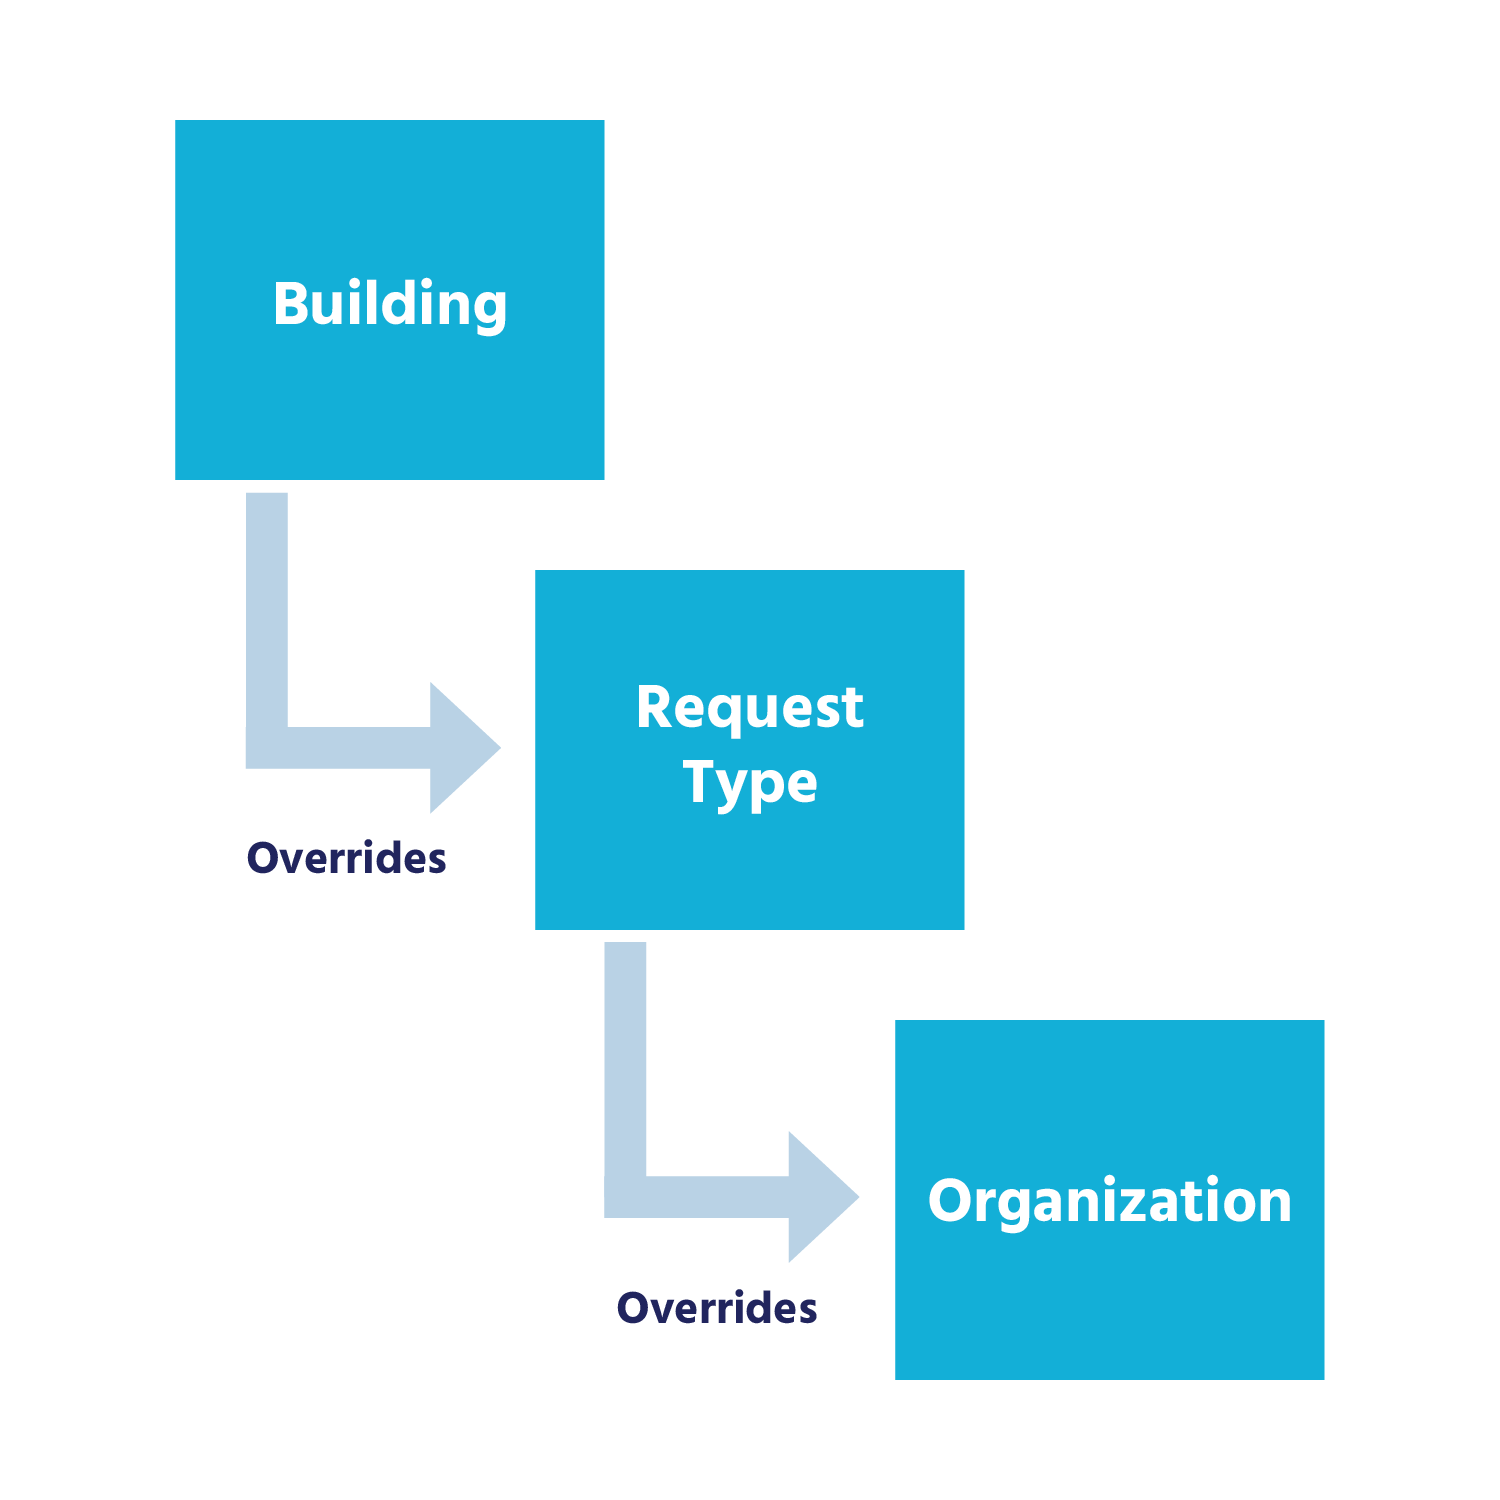 building overrides request type, which then overrides organization